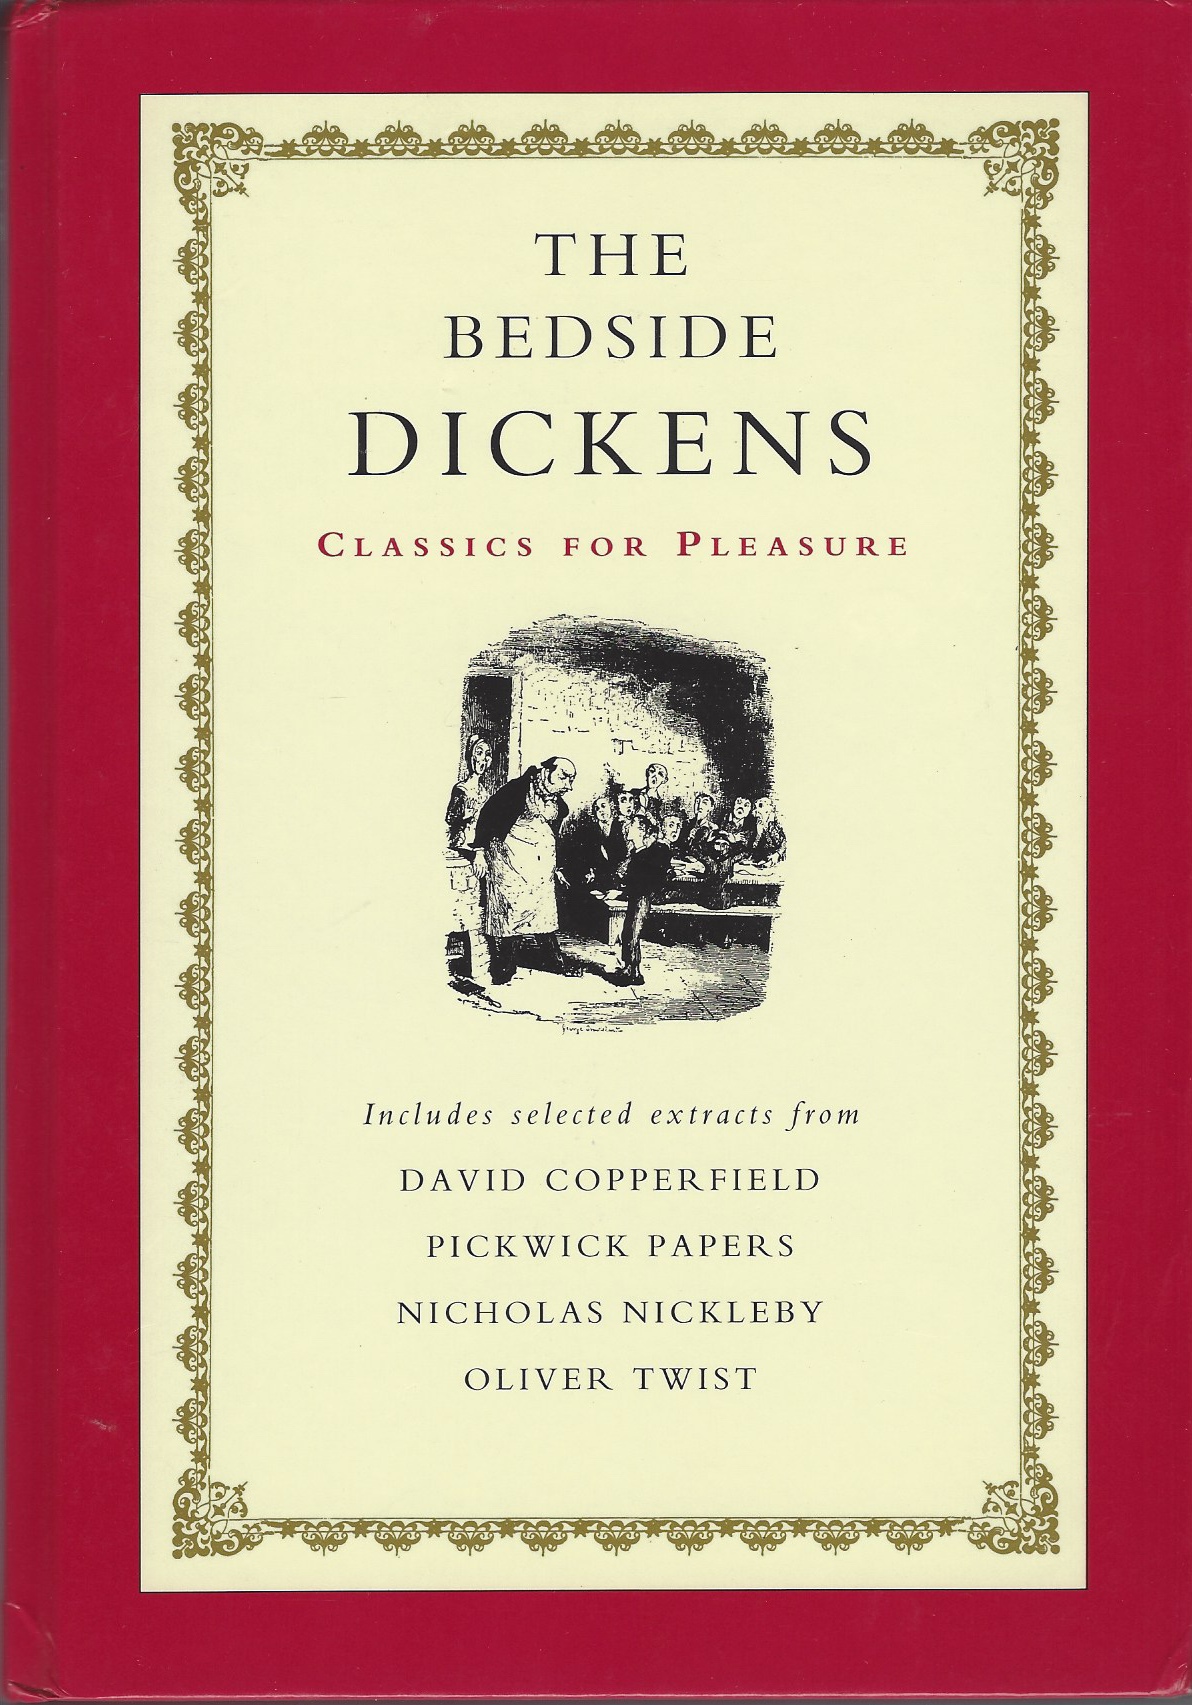 DICKENS, CHARLES - Bedside Dickens: Classics for Pleasure